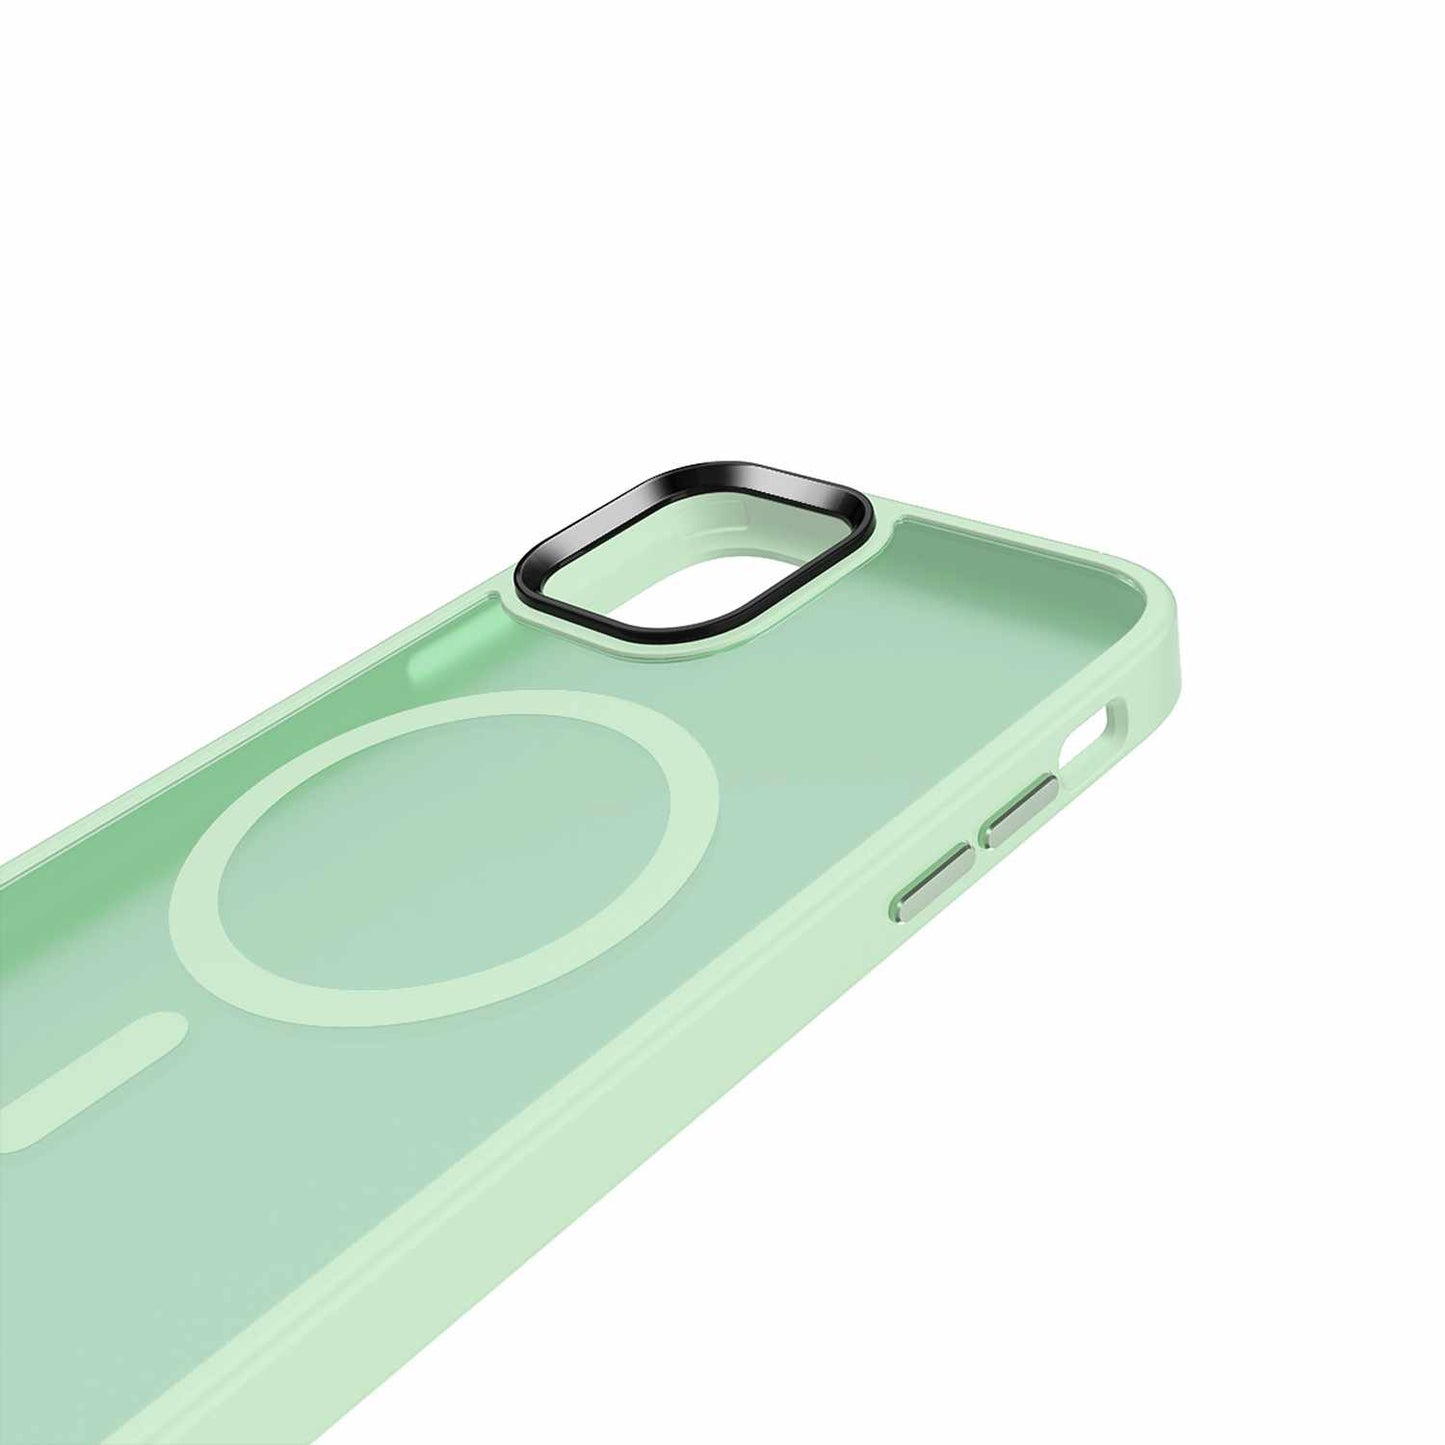 Chromatic Cloud with MagSafe Case Light Green for iPhone 11/XR